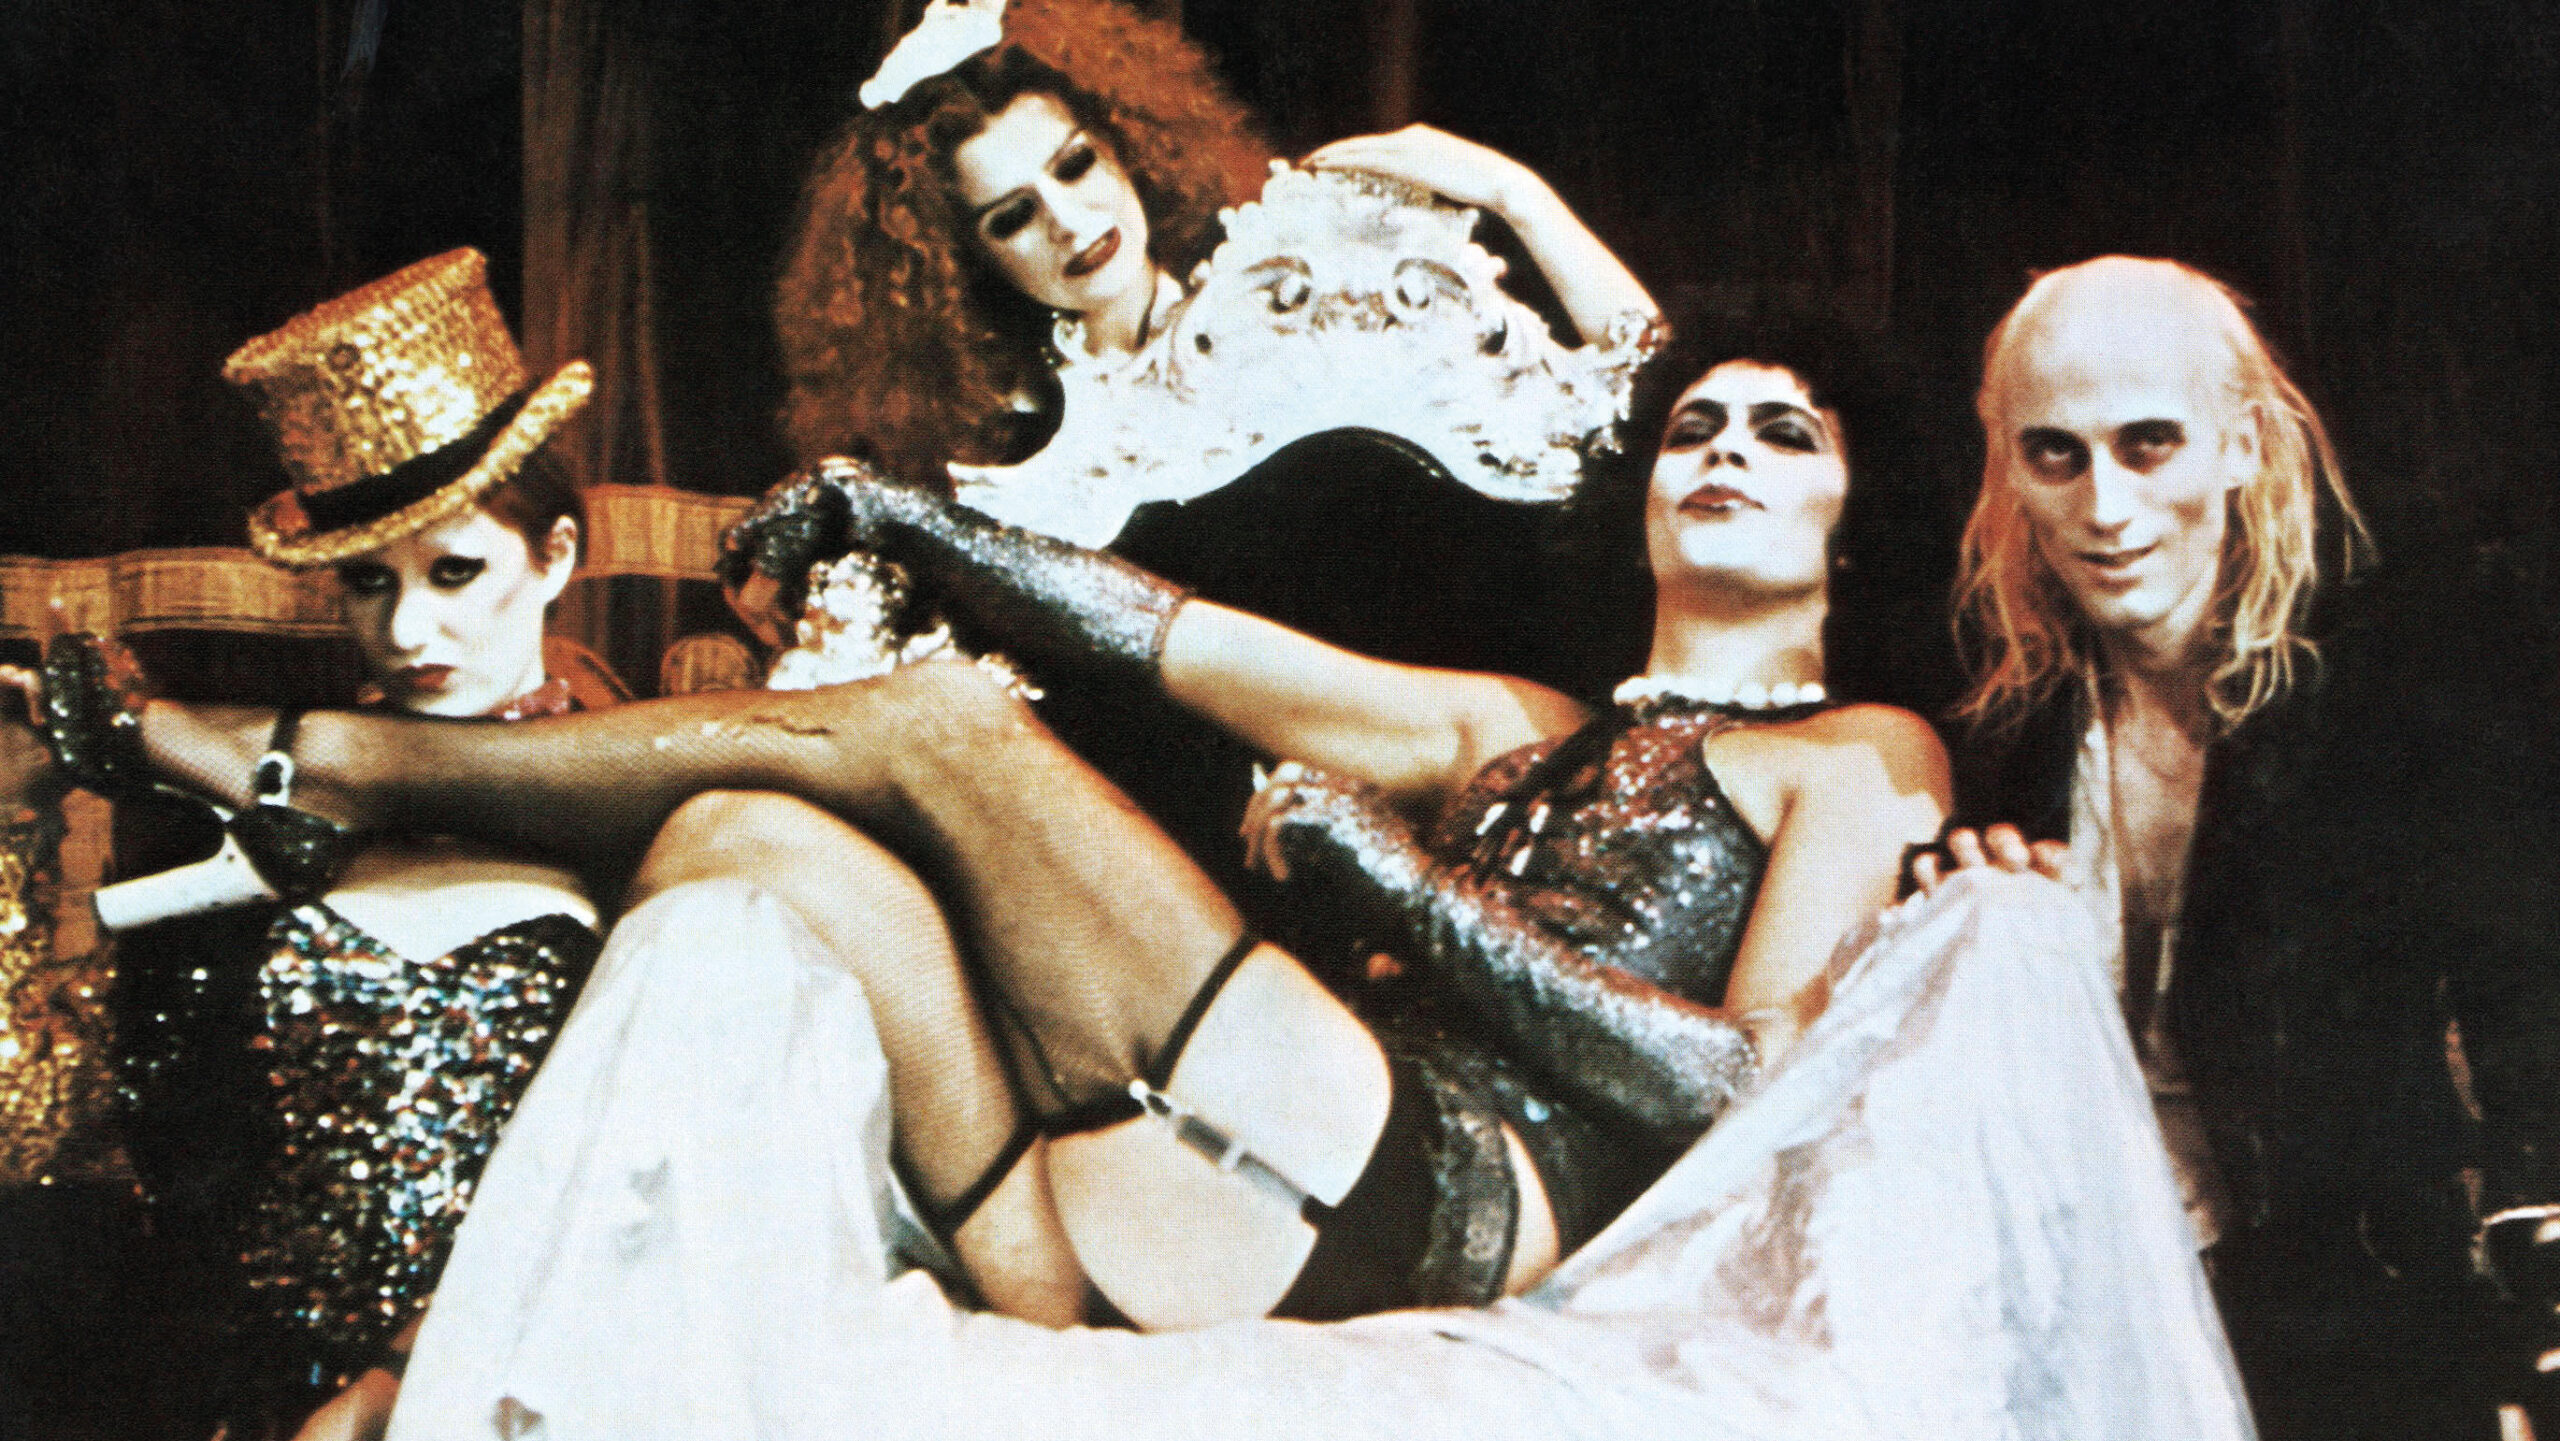 Rocky Horror at 50: 'A place for the marginalised' - The Big Issue